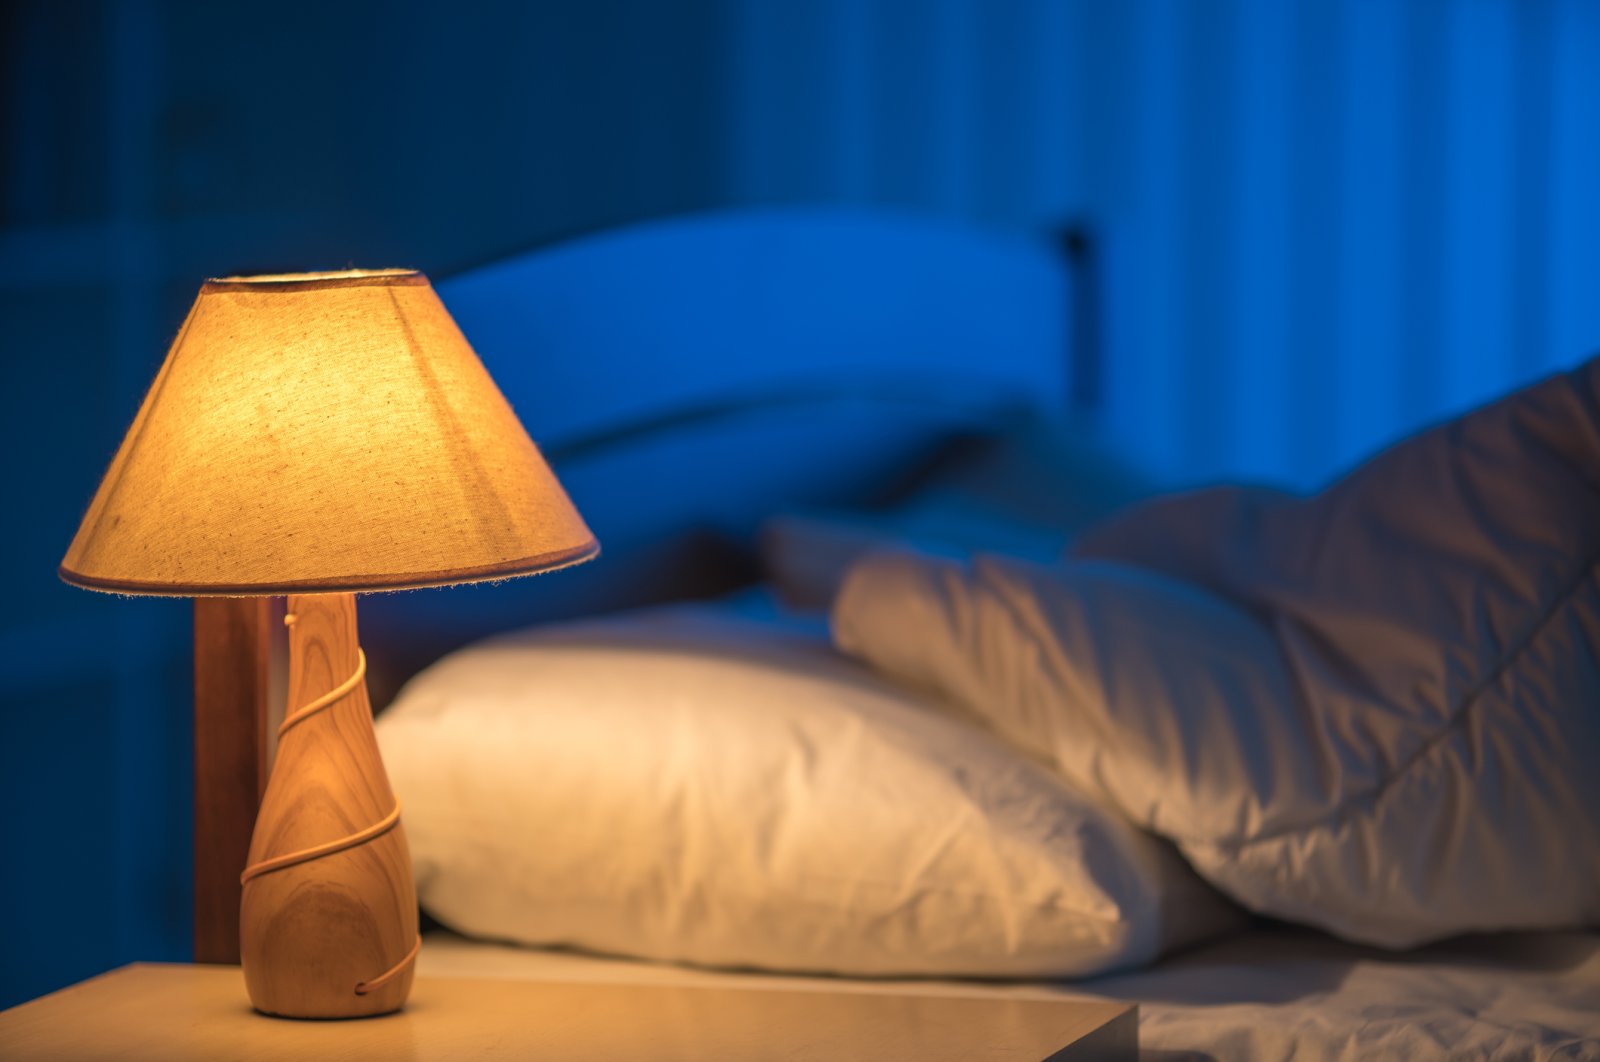 An earlier bedtime could help us shrink our carbon footprint. (iStock Photo)